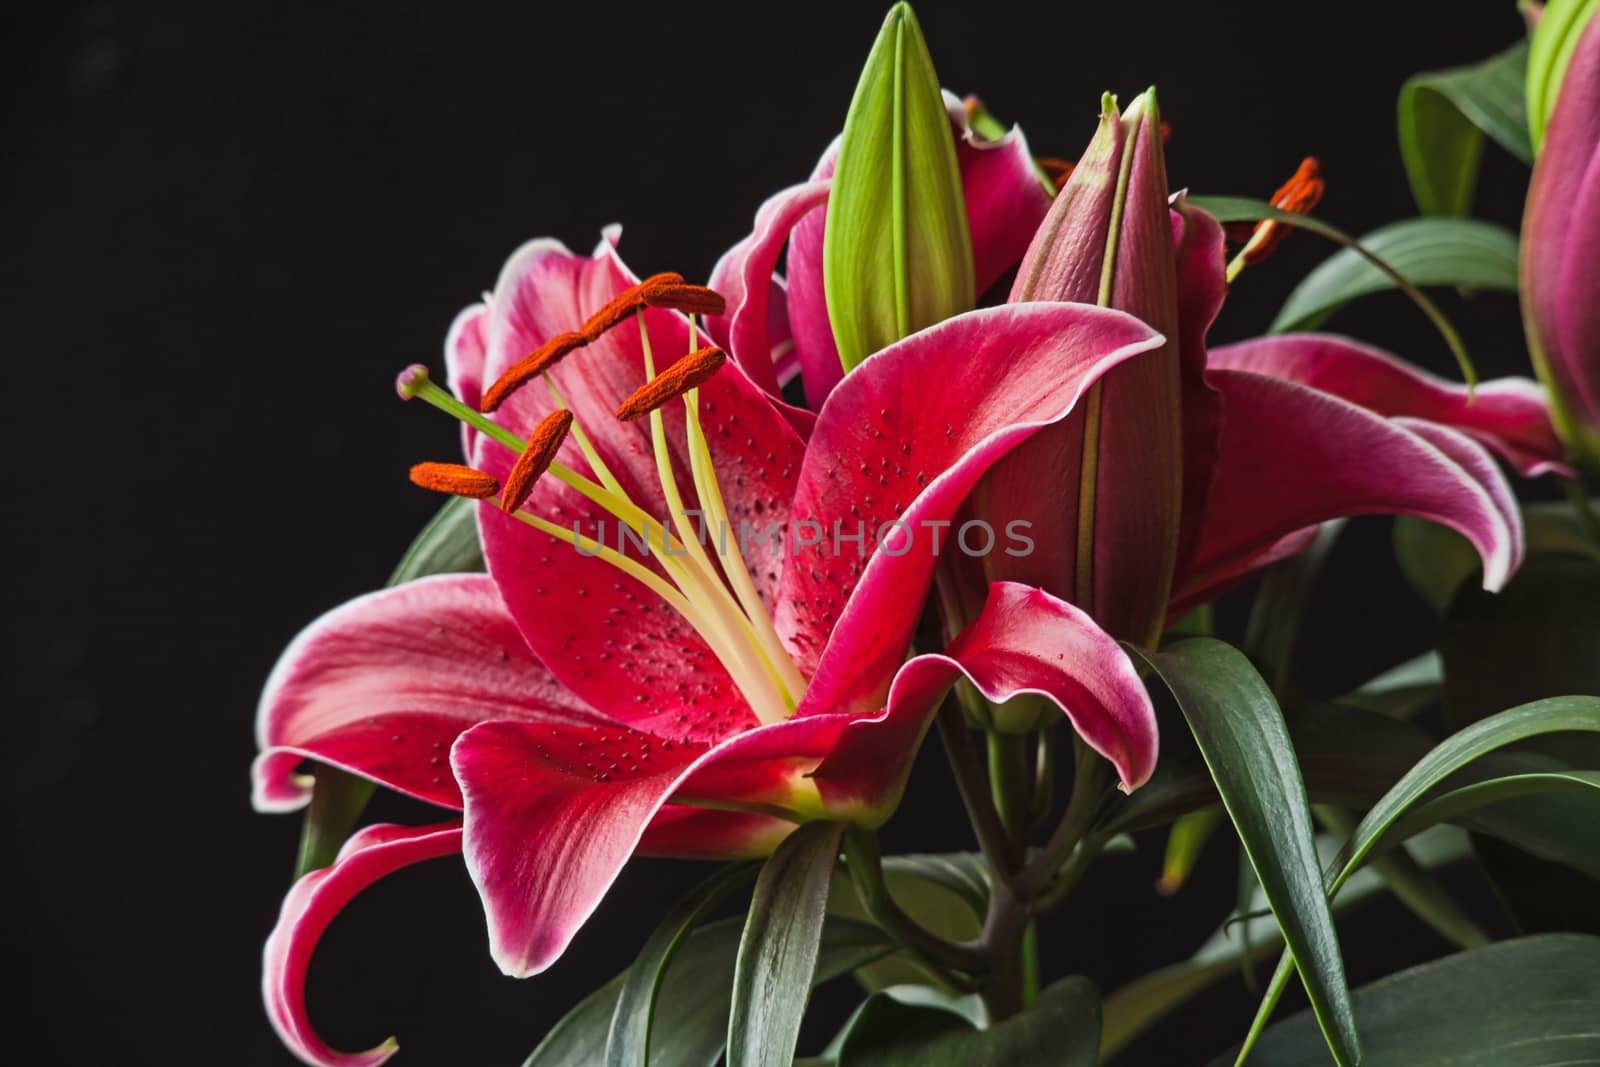 Red Oriental Lily 1 by kobus_peche